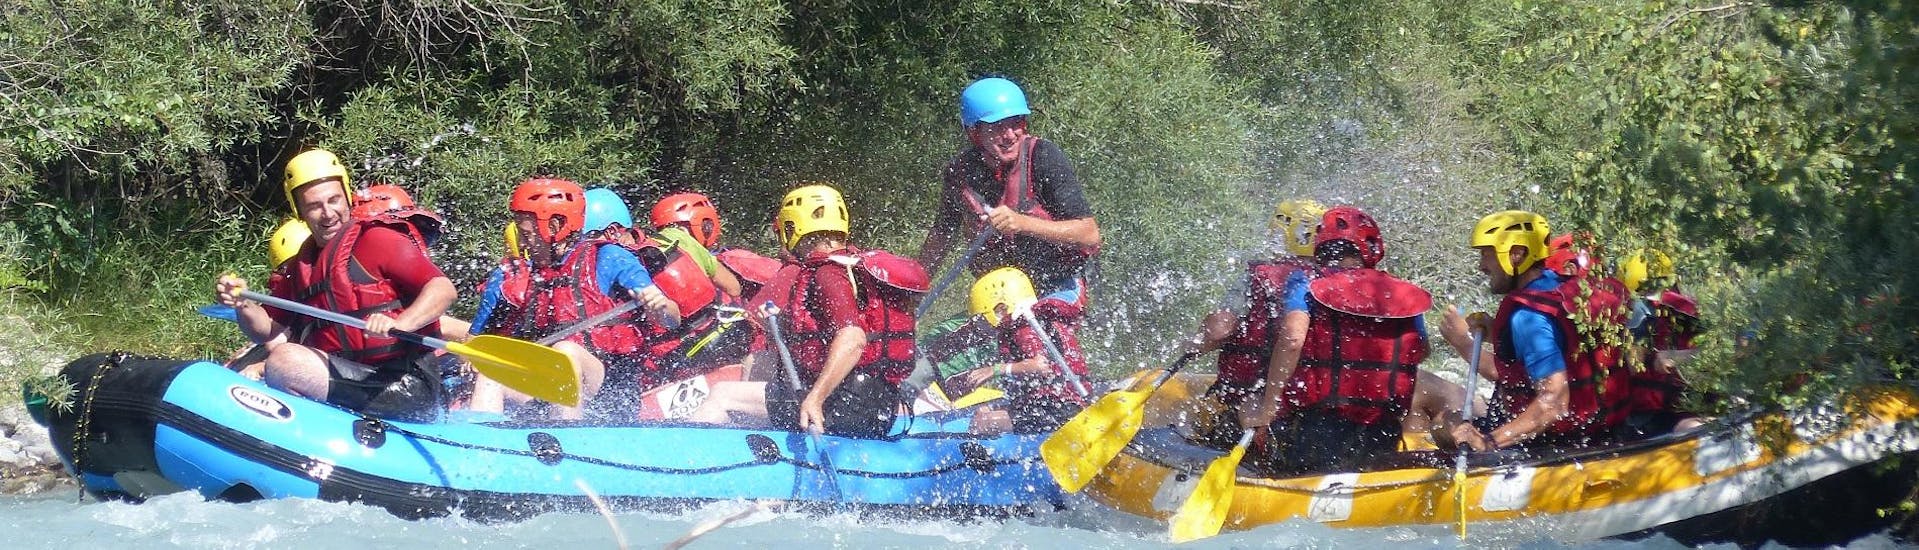 A group of  people is paddling during the Classic Rafting activity on the Higher Guisane with Eaurigine.